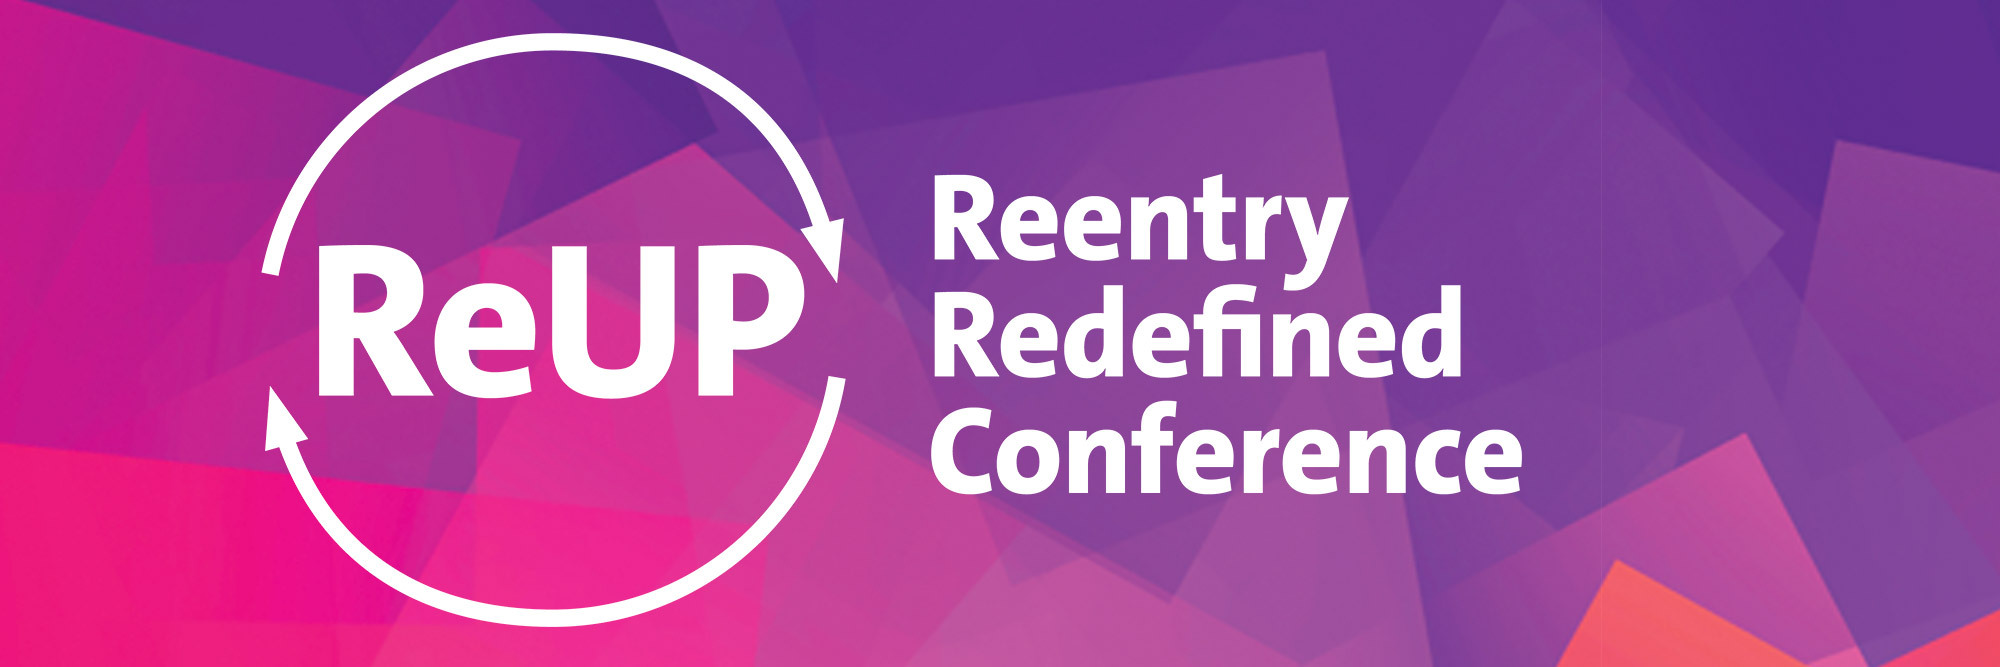 reUP - Reentry Redefined Conference